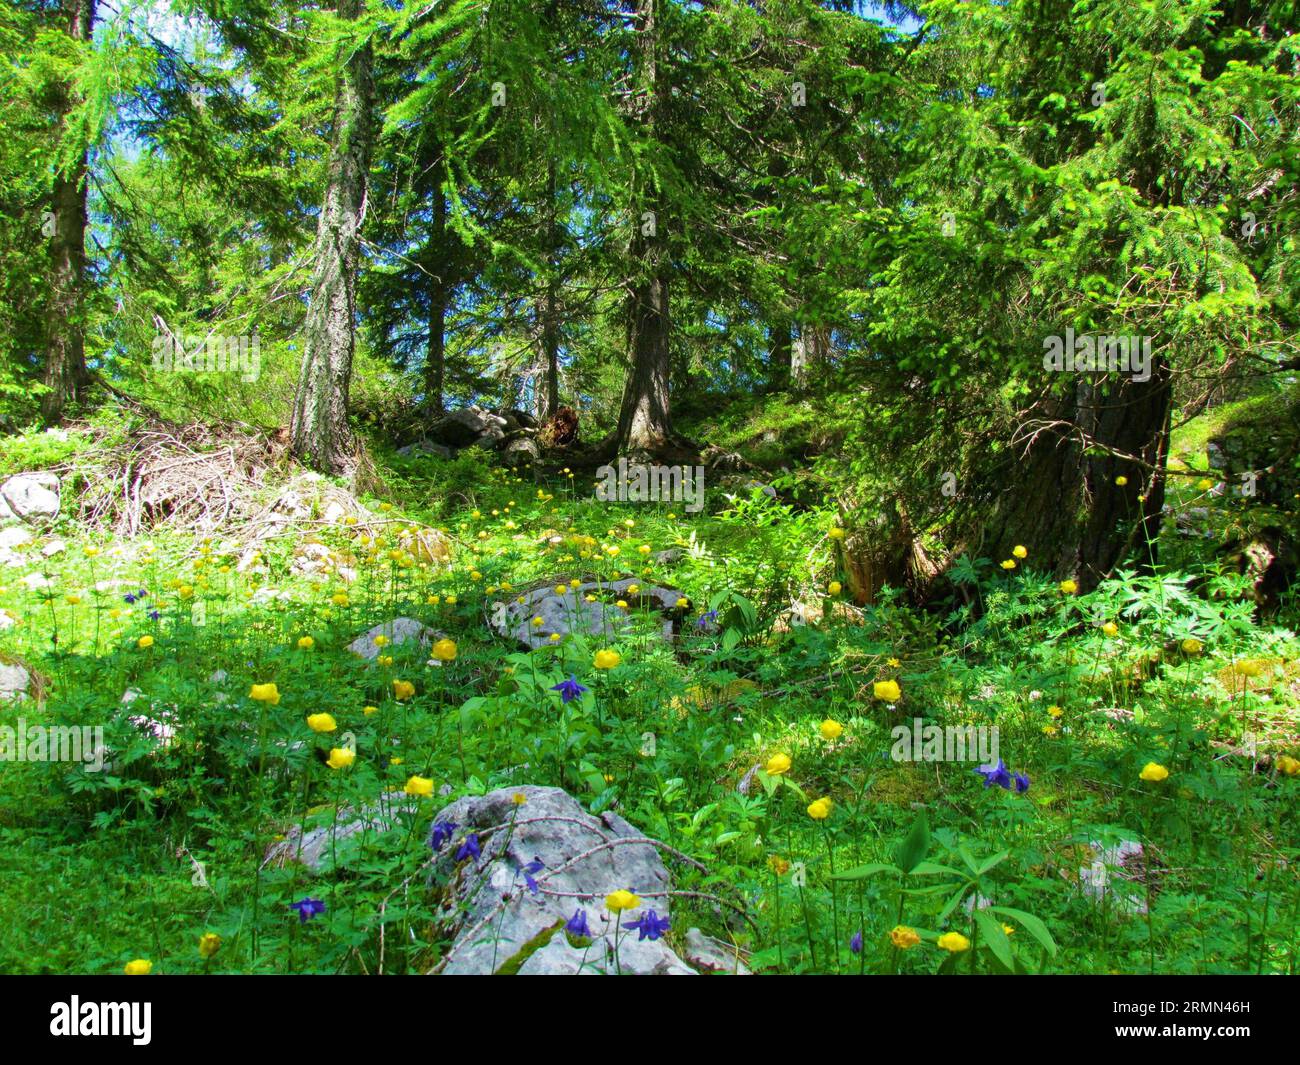 Forest clearing in a spruce forest above Pokljuka in the Julian alps in Slovenia full of yellow blooming globe flower (Trollius europaeus) Stock Photo